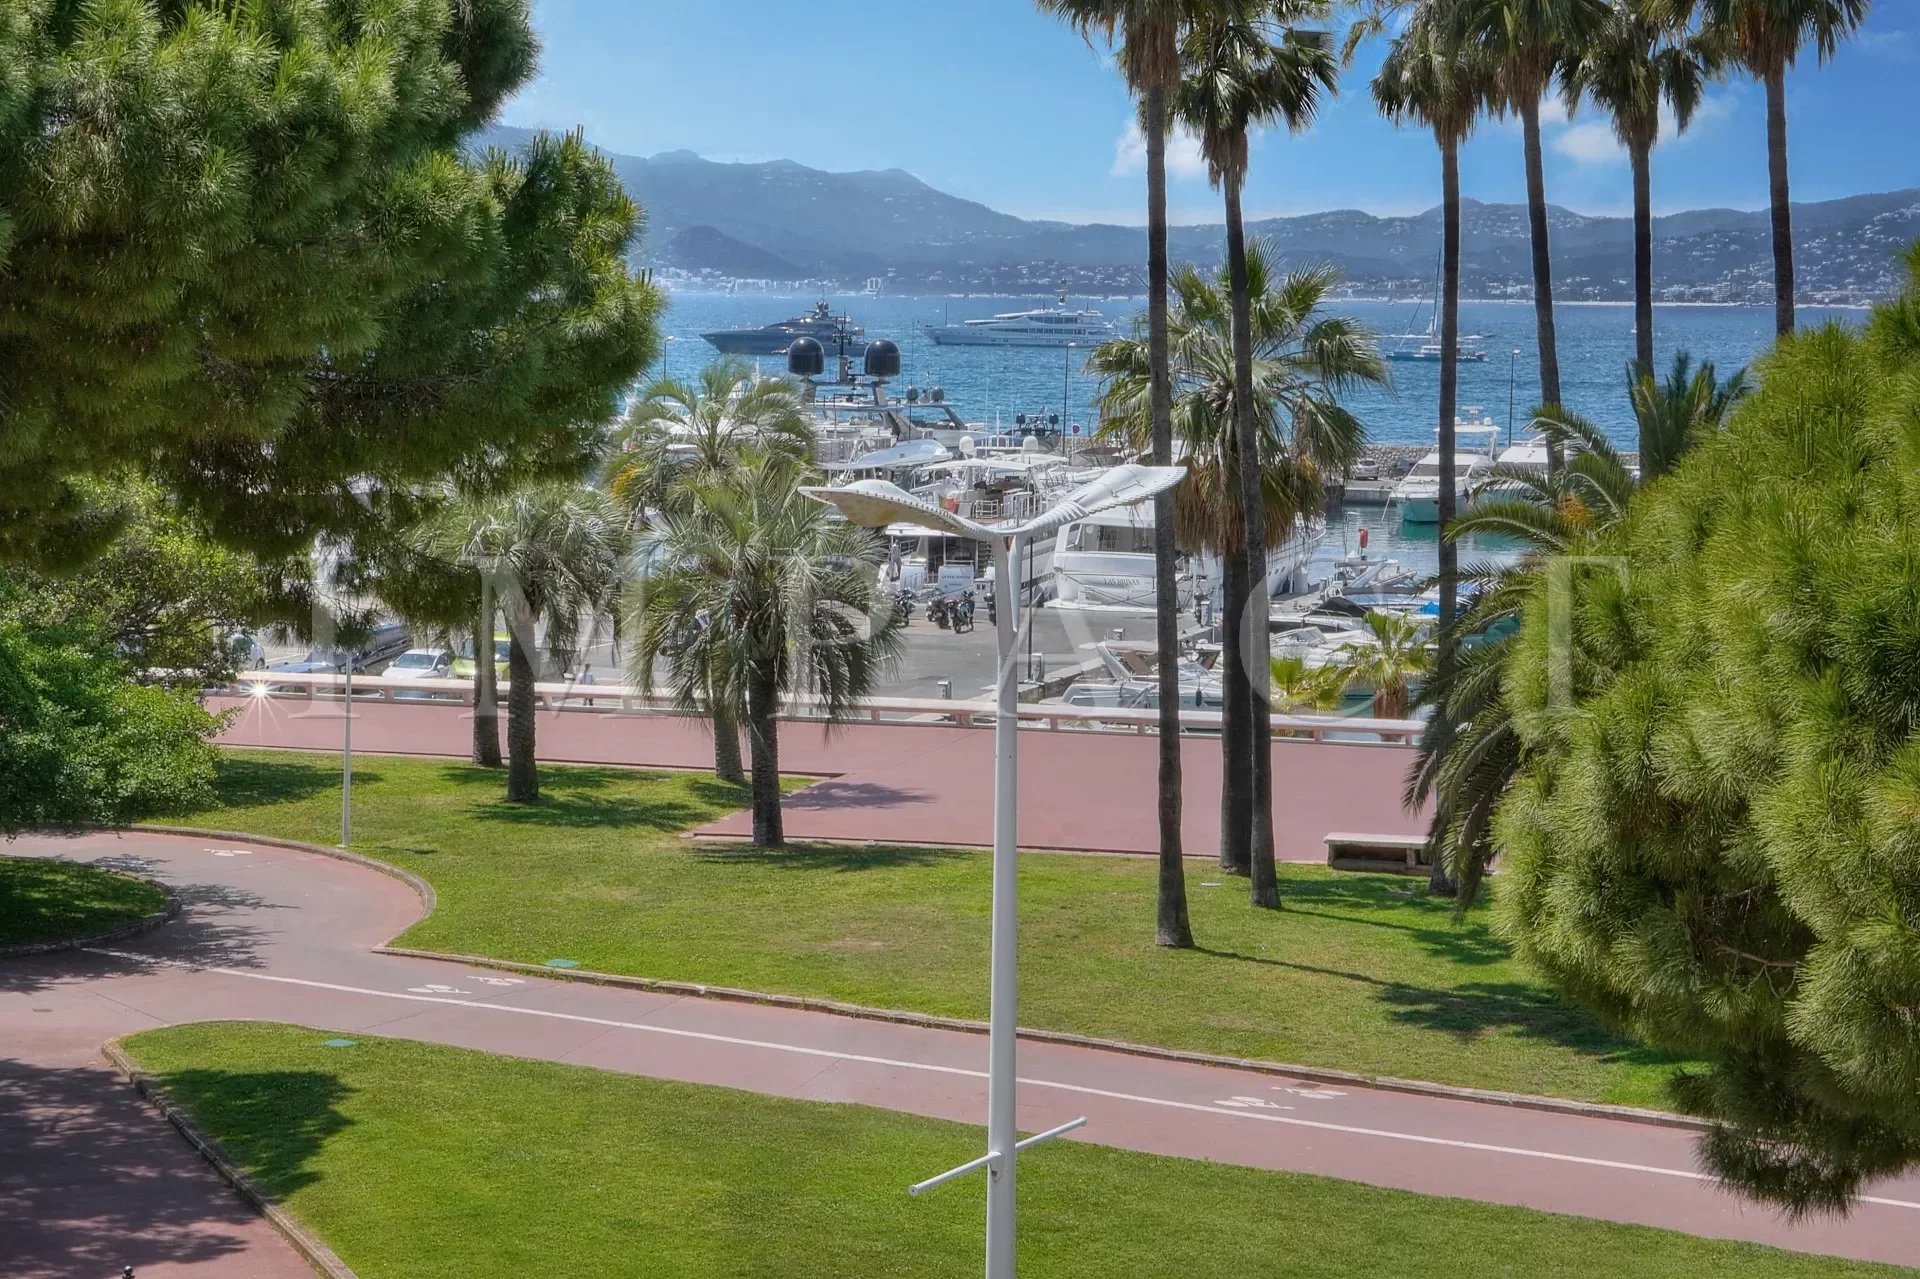 Cannes Croisette renovated apartment for sale